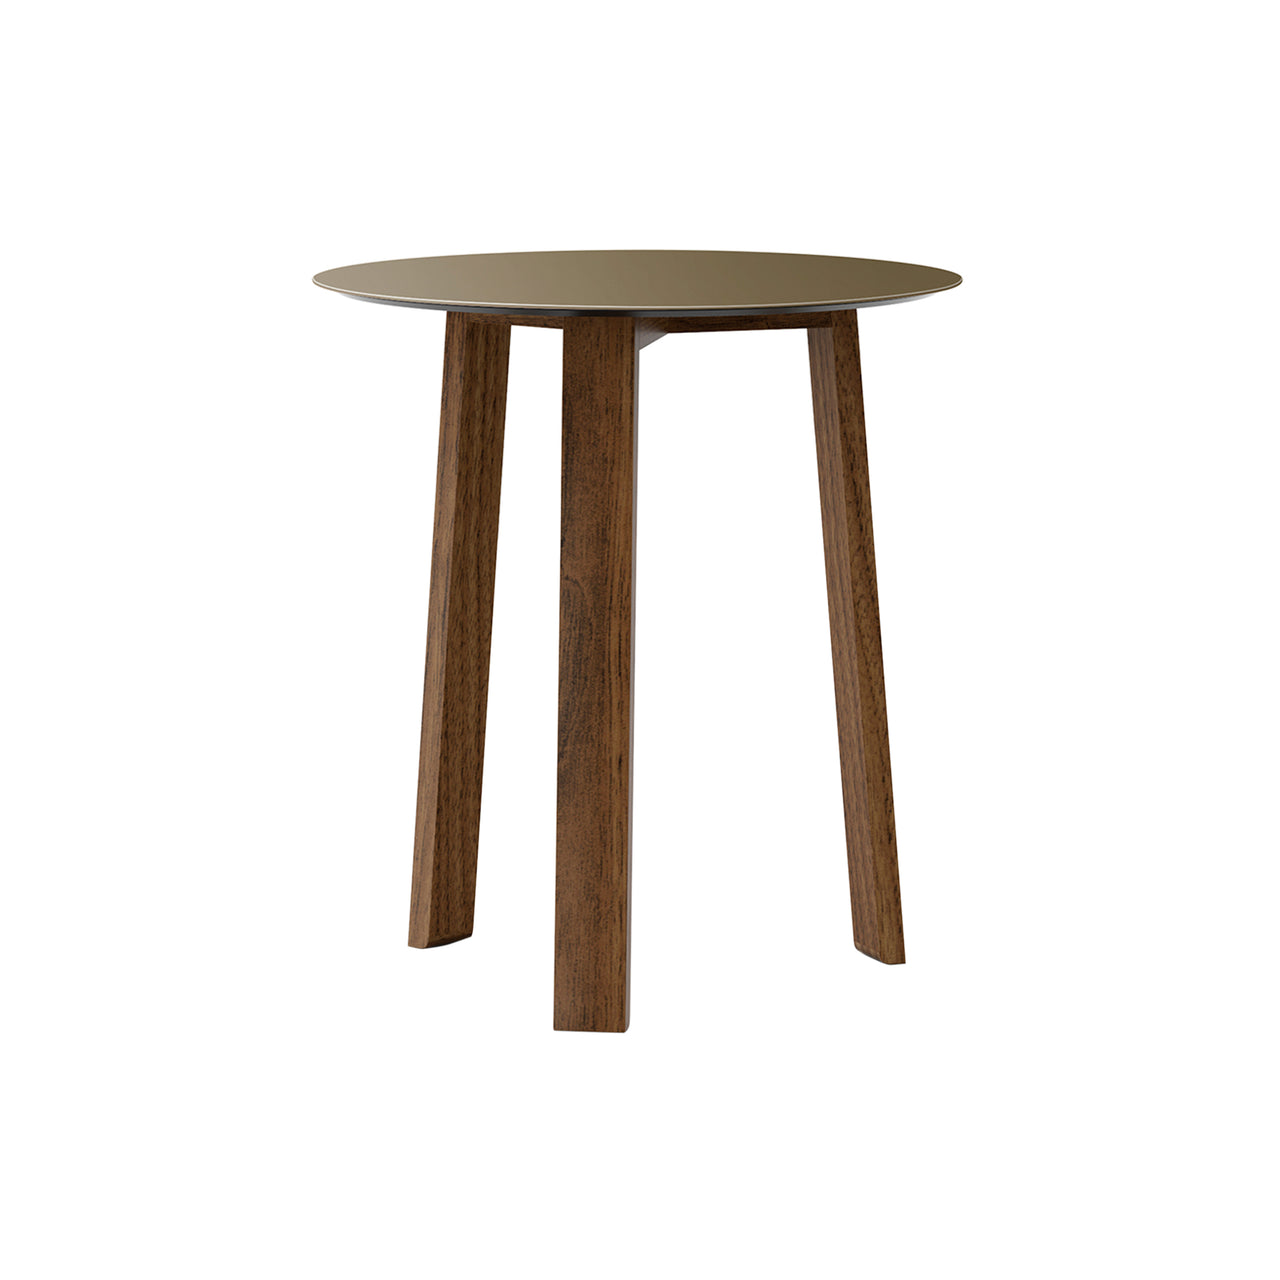 Stockholm Round Side Table: High + Bronze Anodised Aluminum + Walnut Stained Walnut